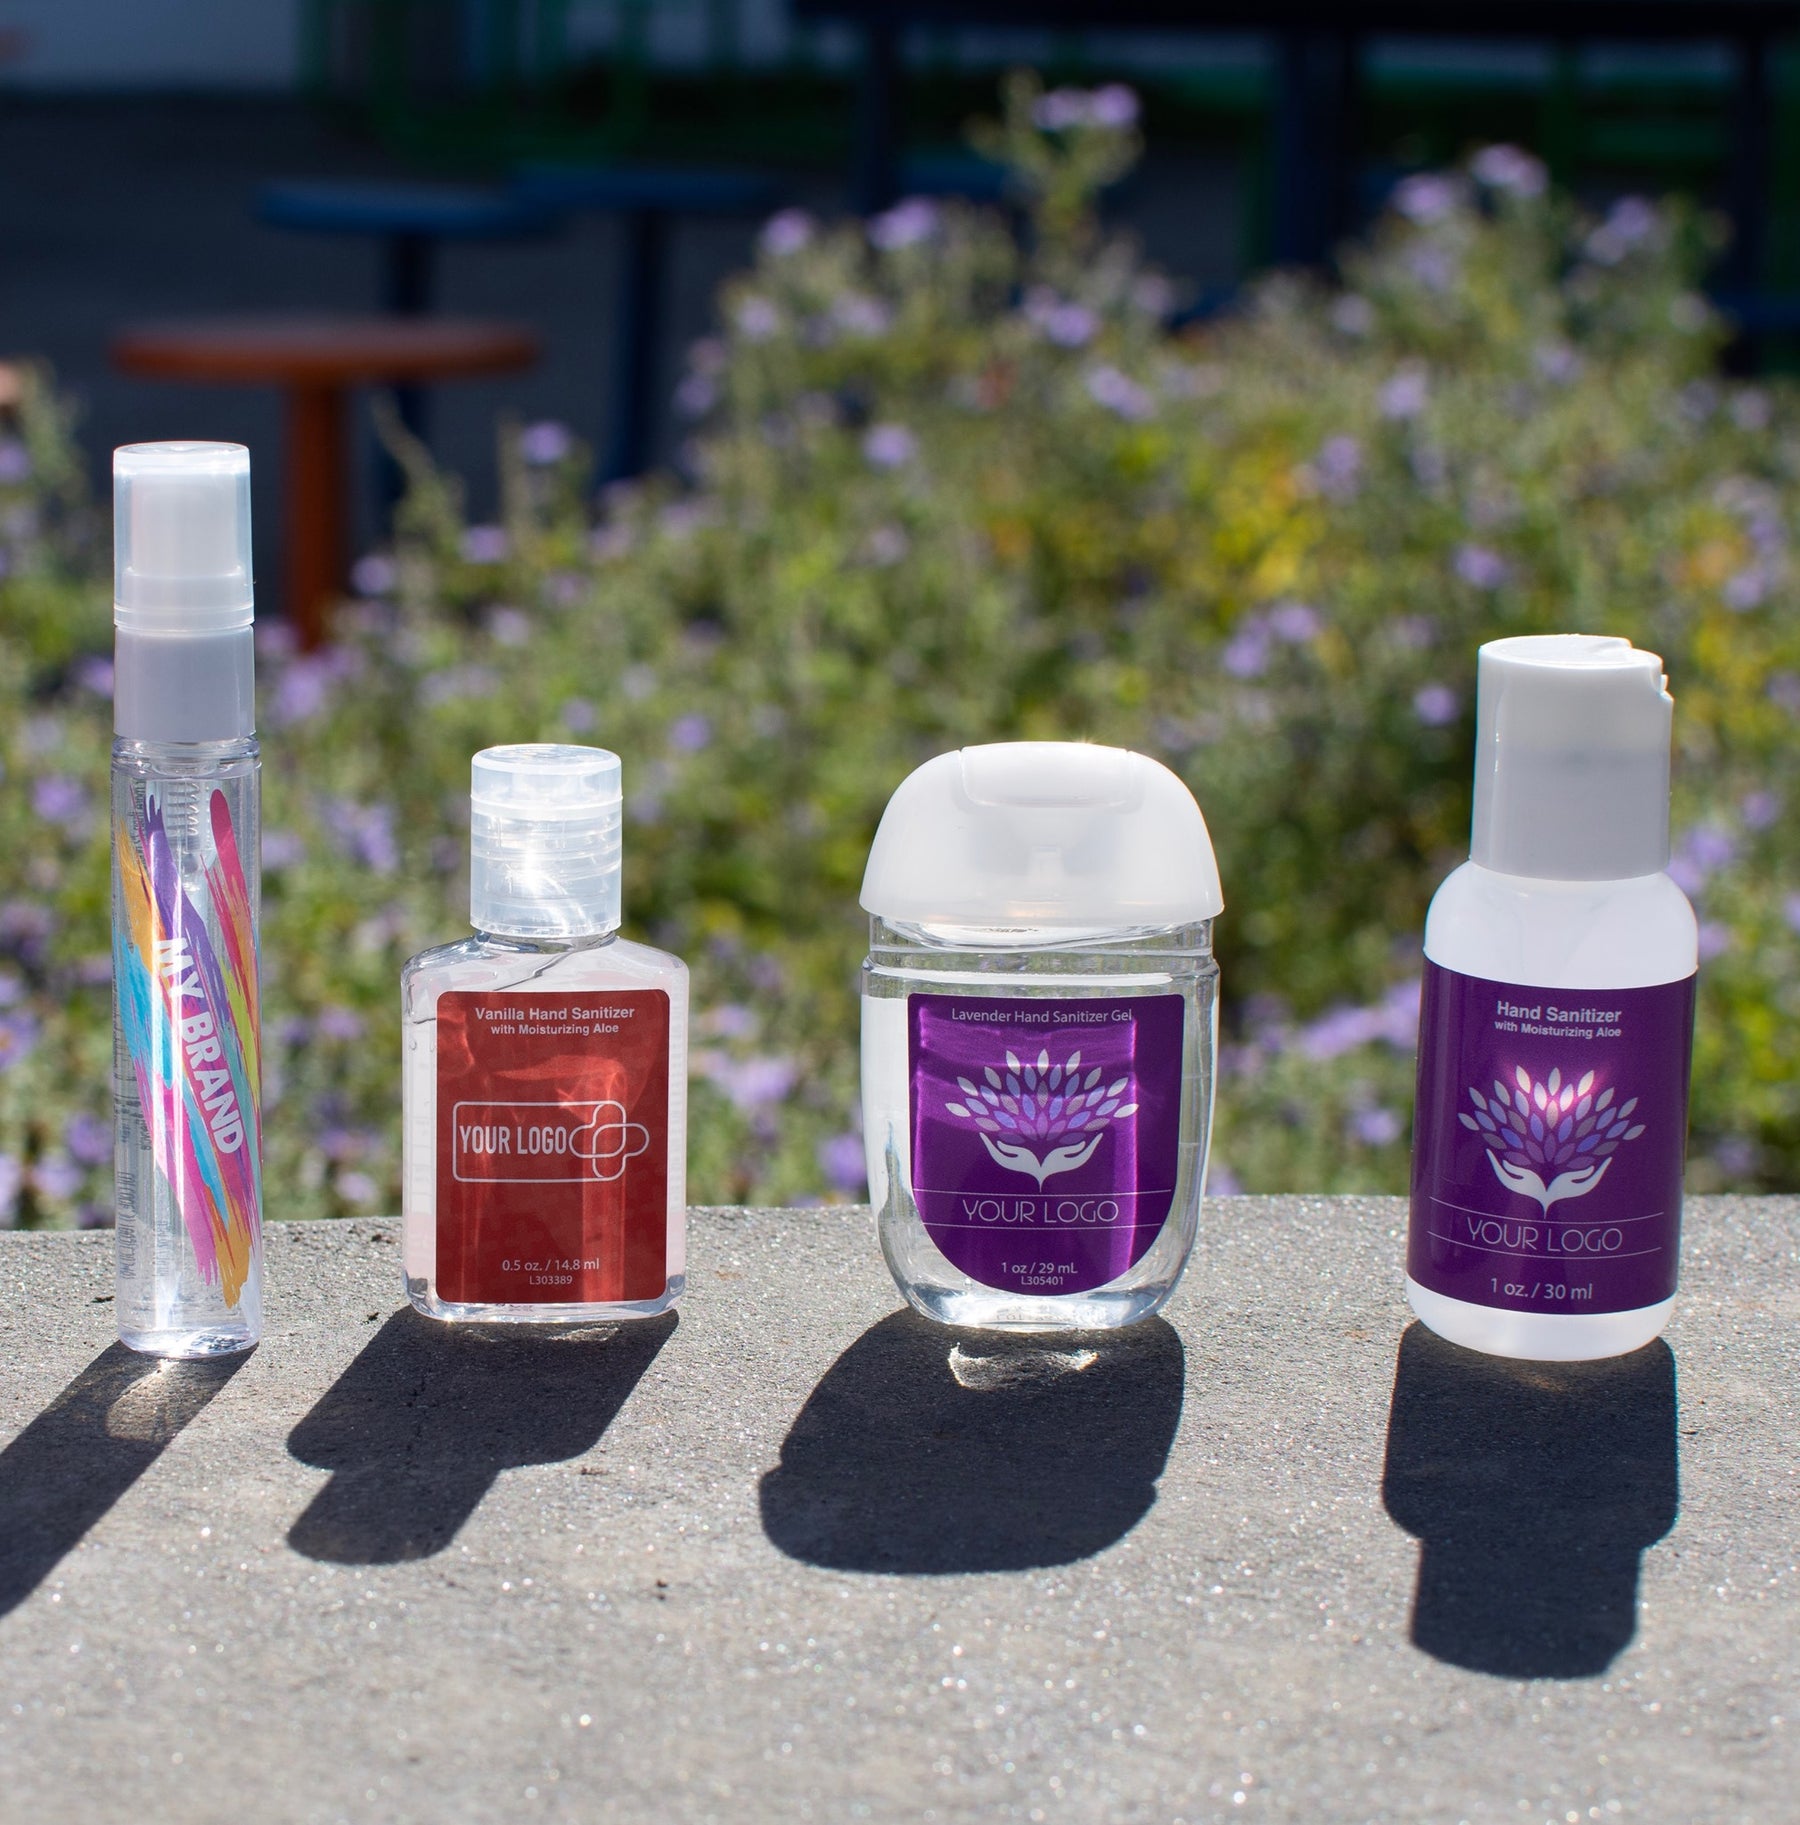 Branded Hand Sanitizers and COVID-19